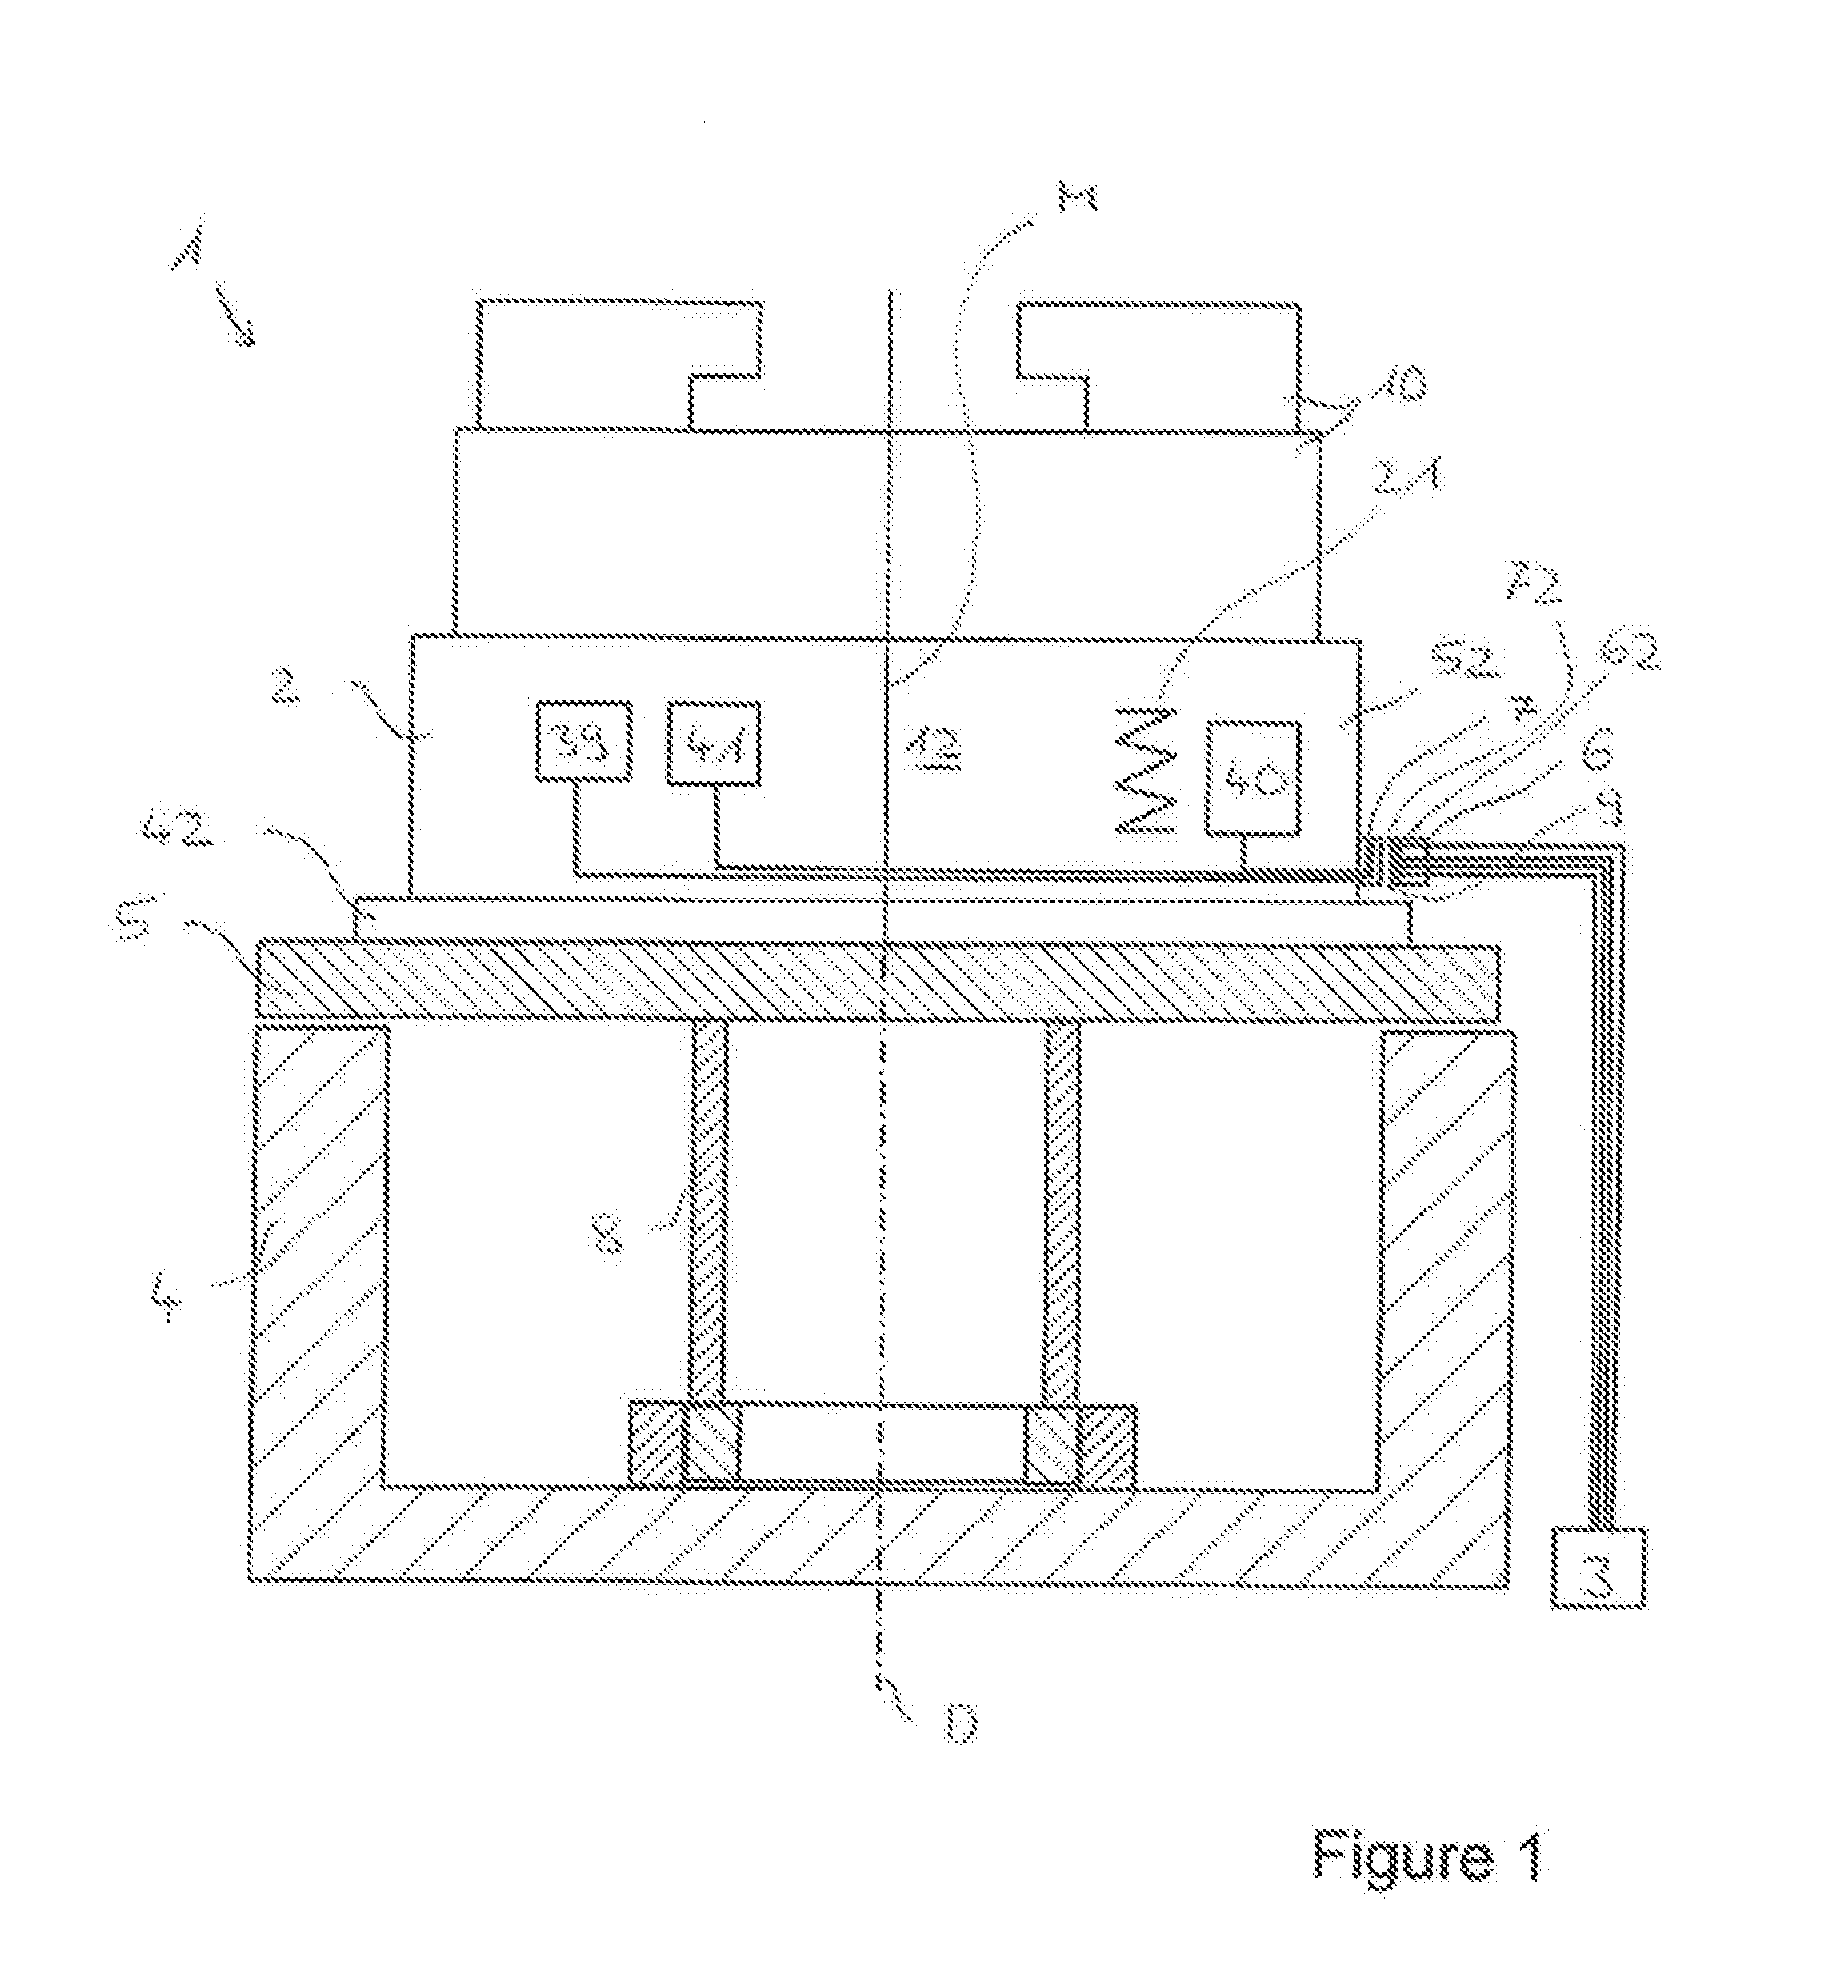 Transmission Arrangement Such as for Energy and/or Signal Transmission